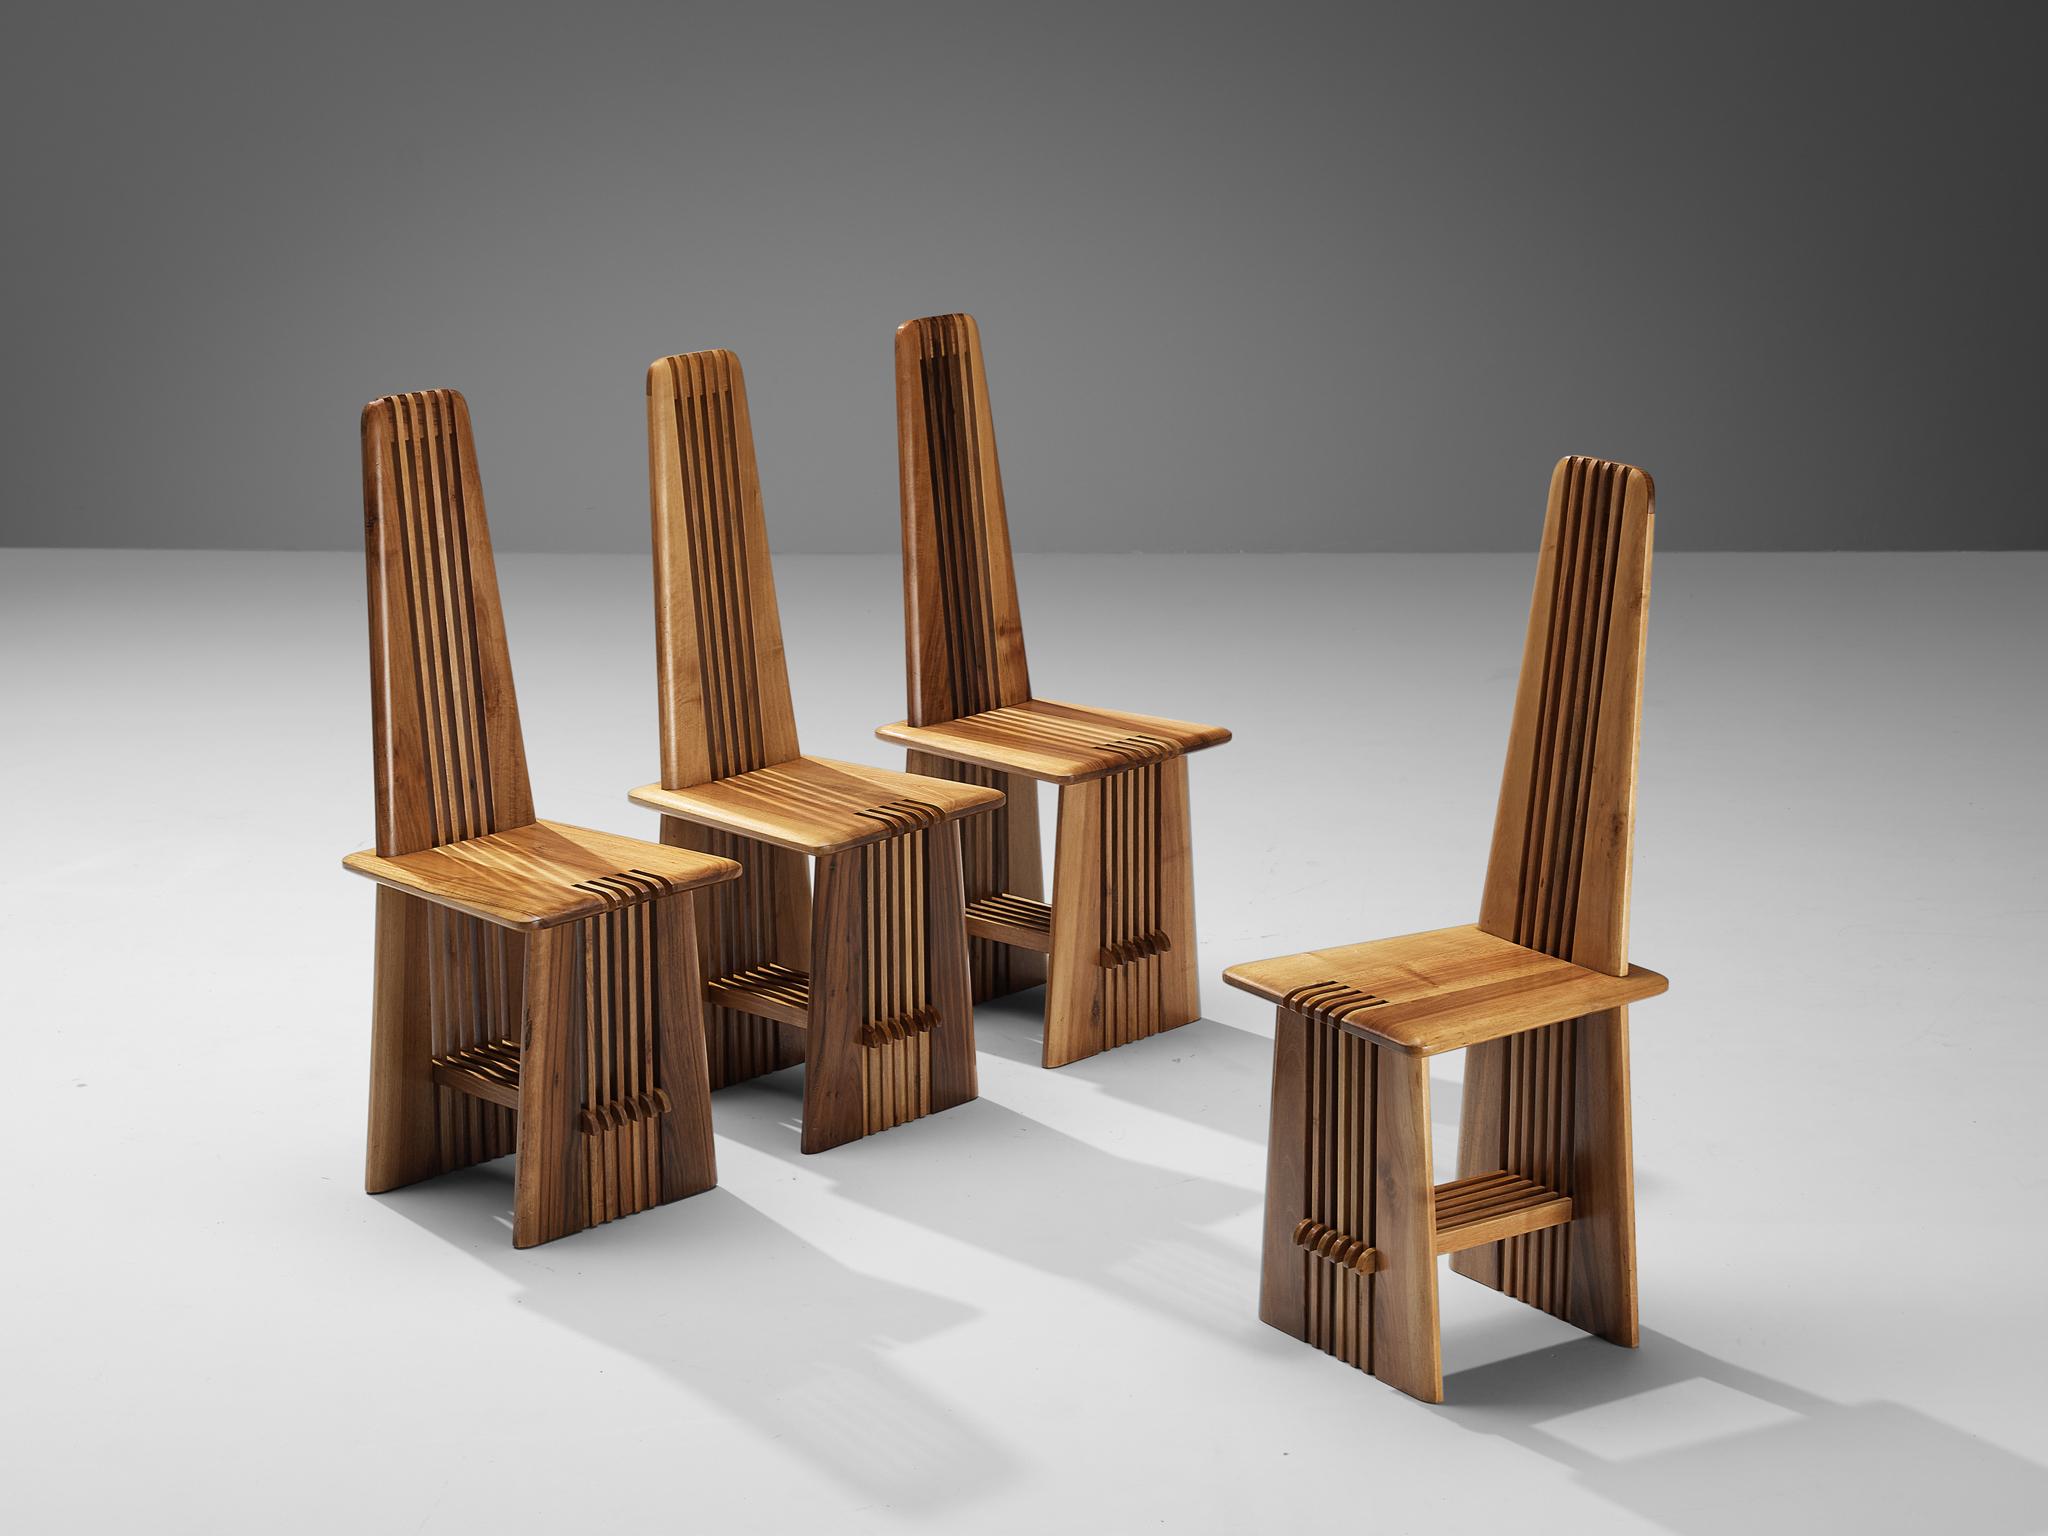 Giorgio Vignali and Renato Pederiva for Antonio Sala, set of four 'Pentagramma' dining chairs, walnut, Italy, circa 1980 

These extremely rare dining chairs with a distinctive appearance are designed by Giorgio Vignali and Renato Pederiva for